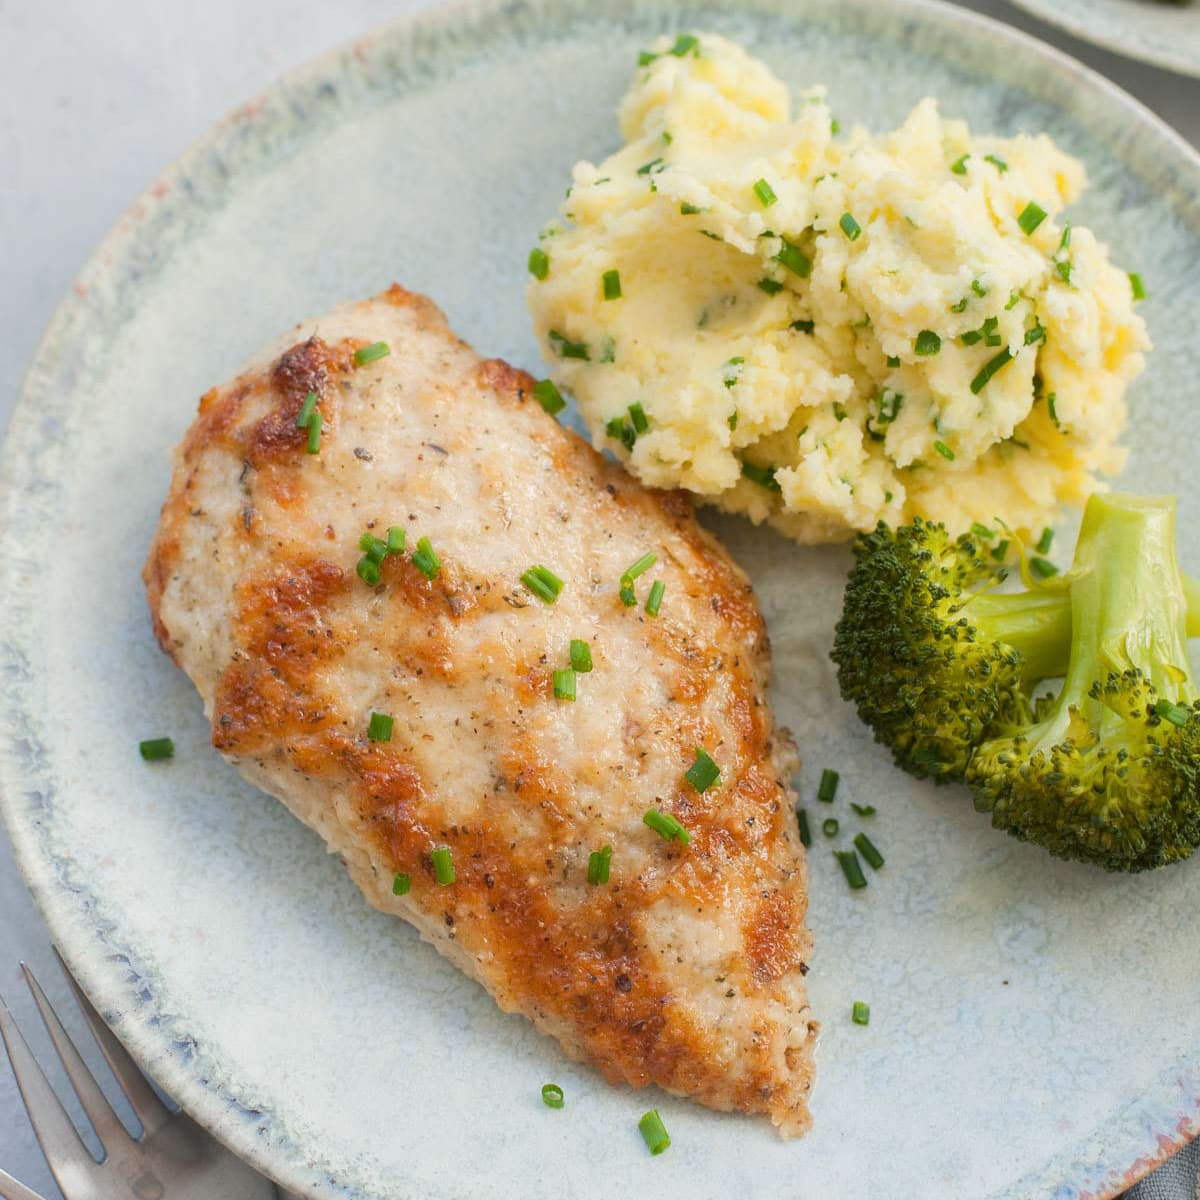 Baked chicken breast on a green plate with mashed potatoes and broccoli.